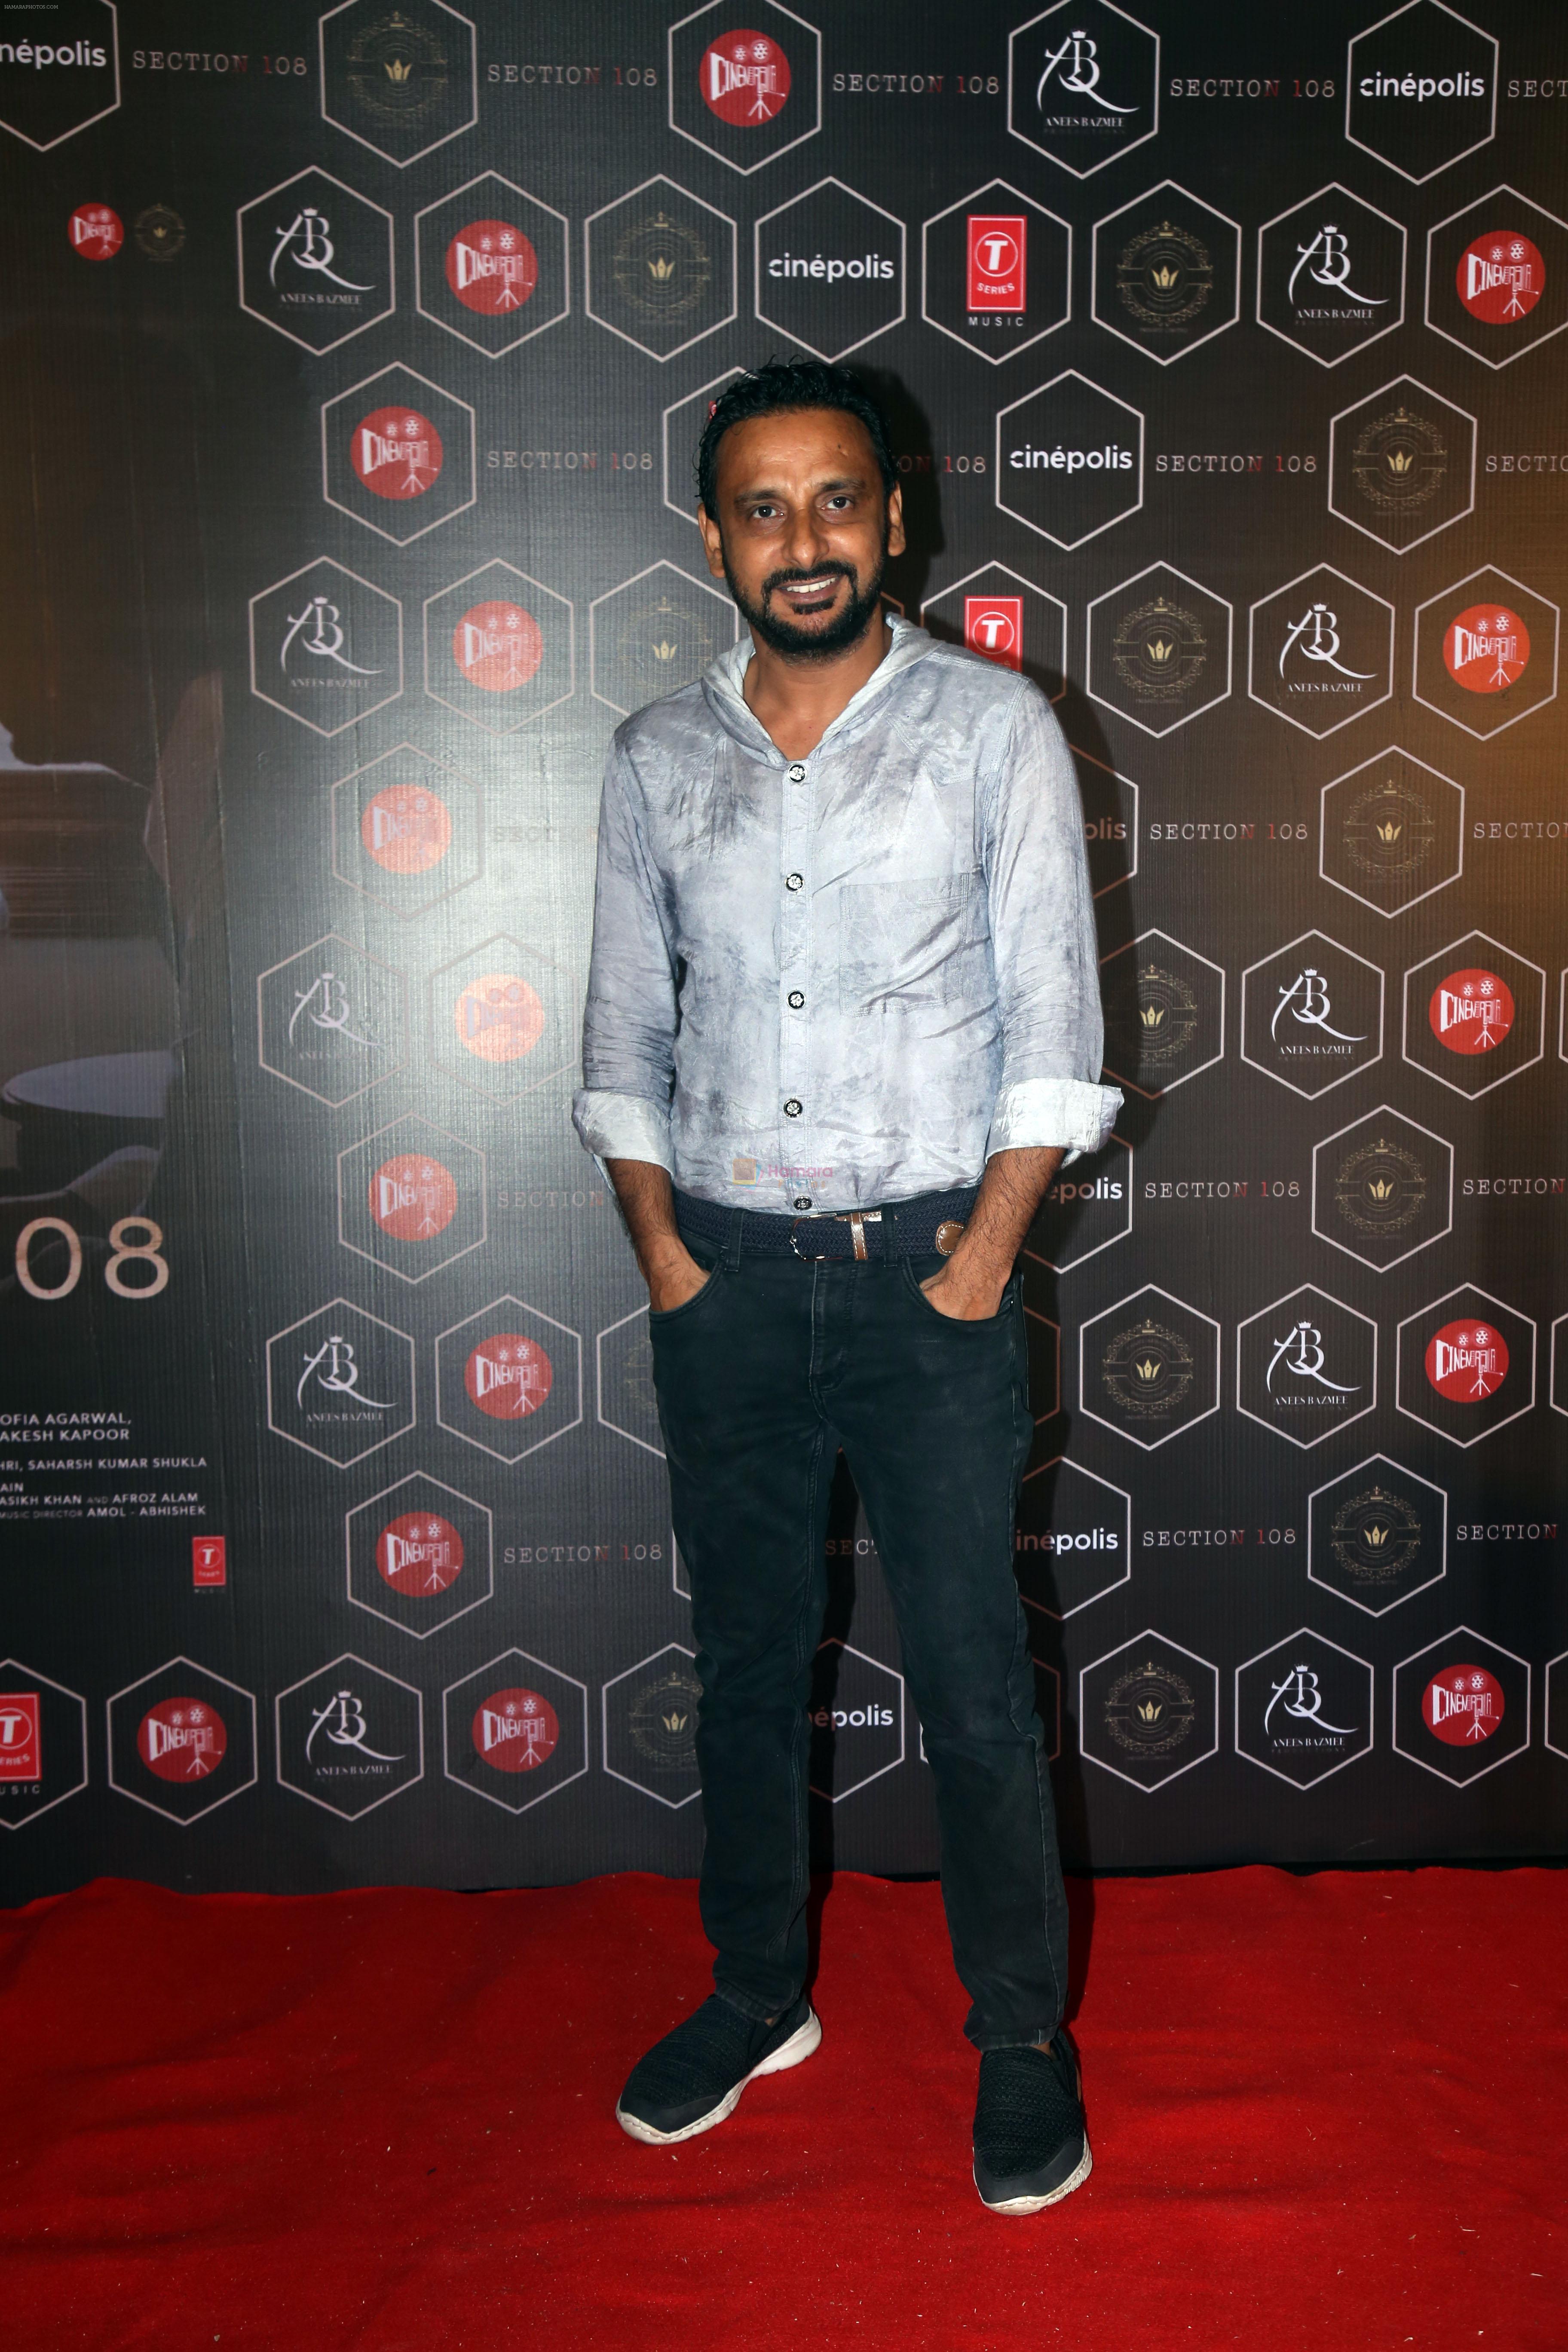 Inaamulhaq at the launch of film Section 108 Teaser on 27th August 2023